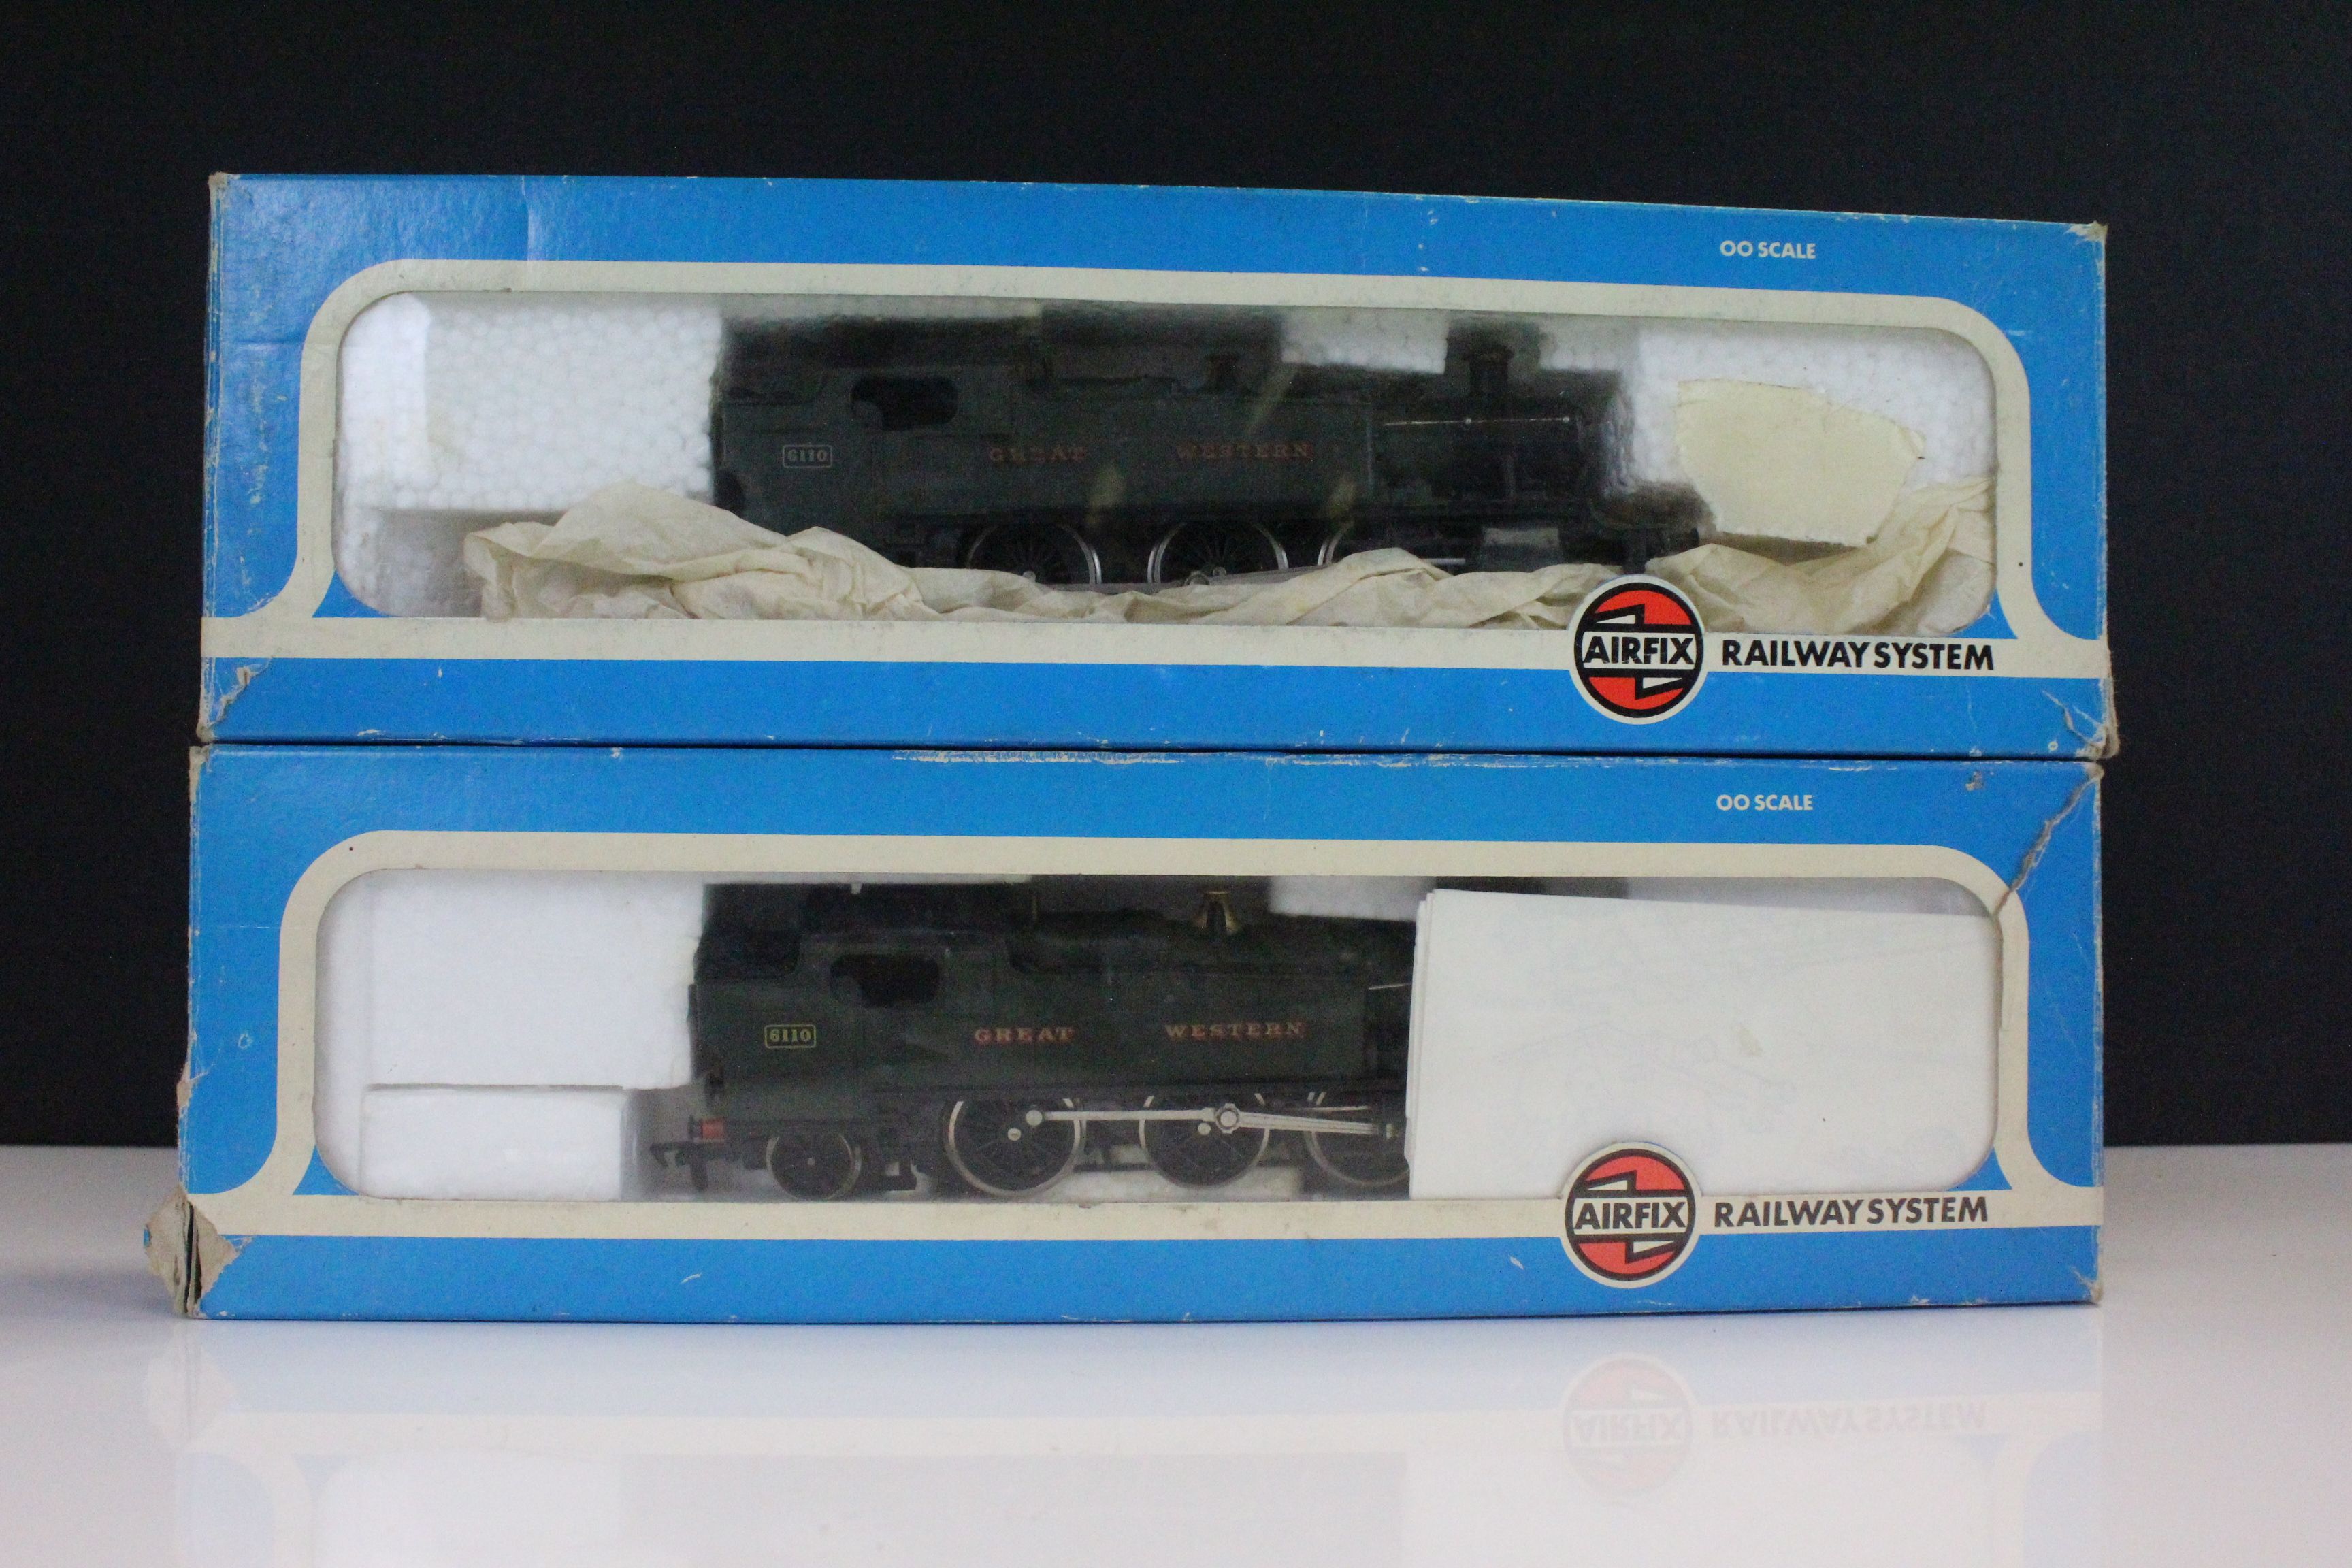 Seven boxed OO gauge locomotives to include 5 x Airfix (2 x 54150-1 Prairie Tank Locomotive 2-6-2 - Image 2 of 7